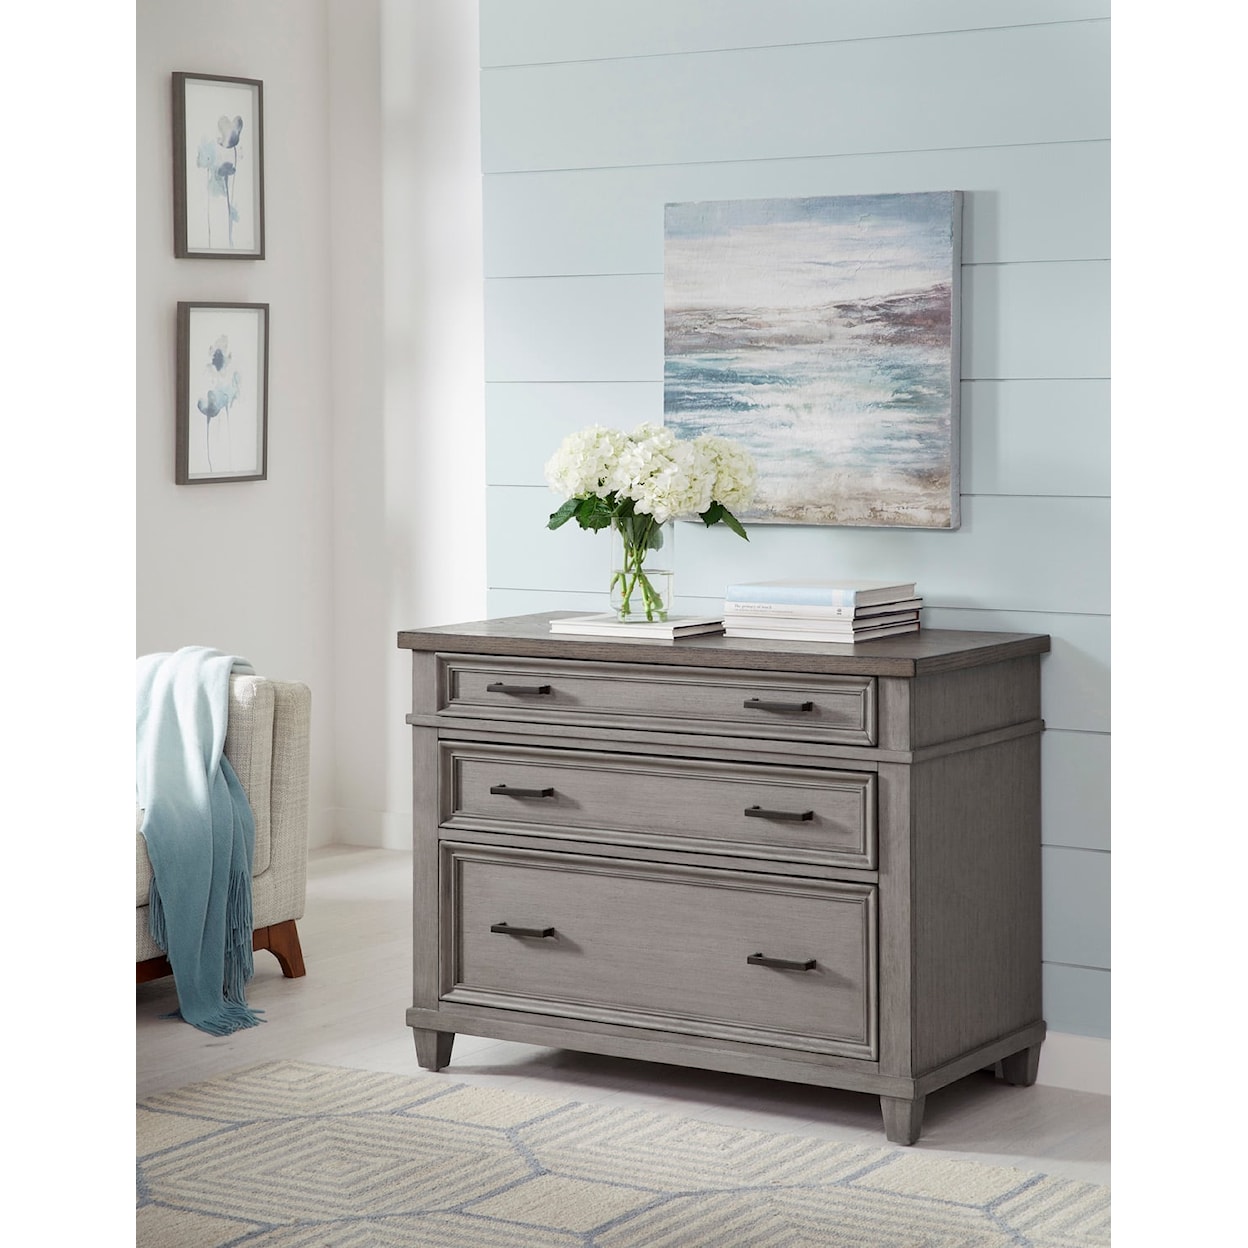 Aspenhome Eileen Lateral File Cabinet